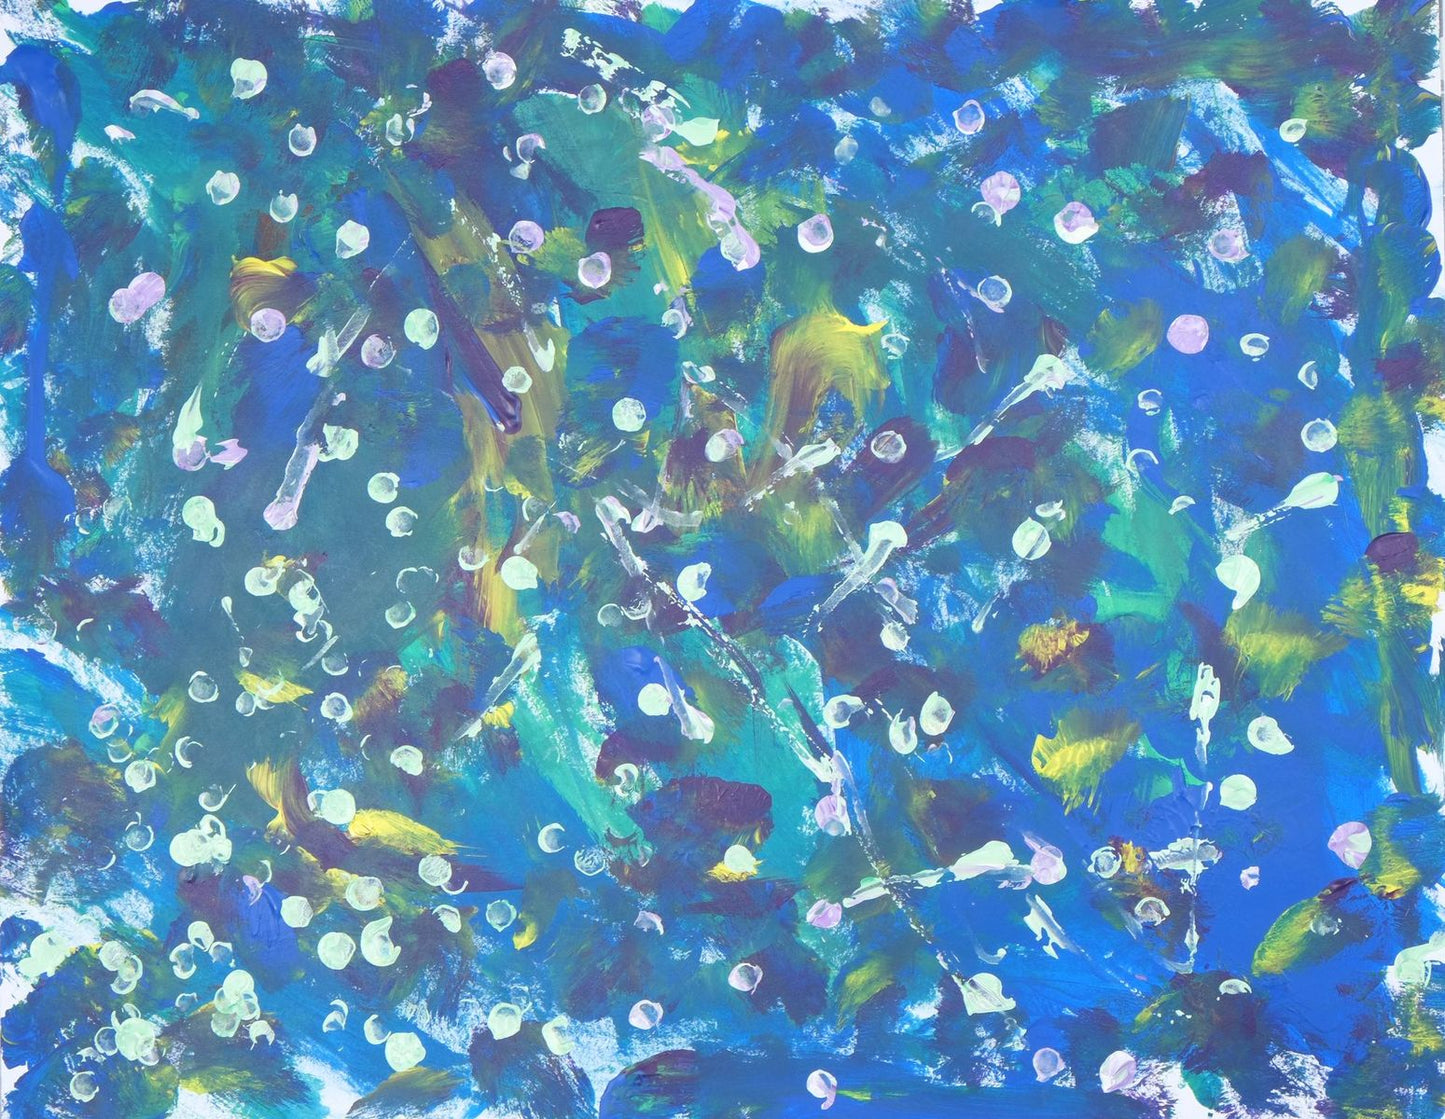 Acrylic on paper artwork of lavender and white dots against a background of yellow, blue, purple and seafoam melting colors